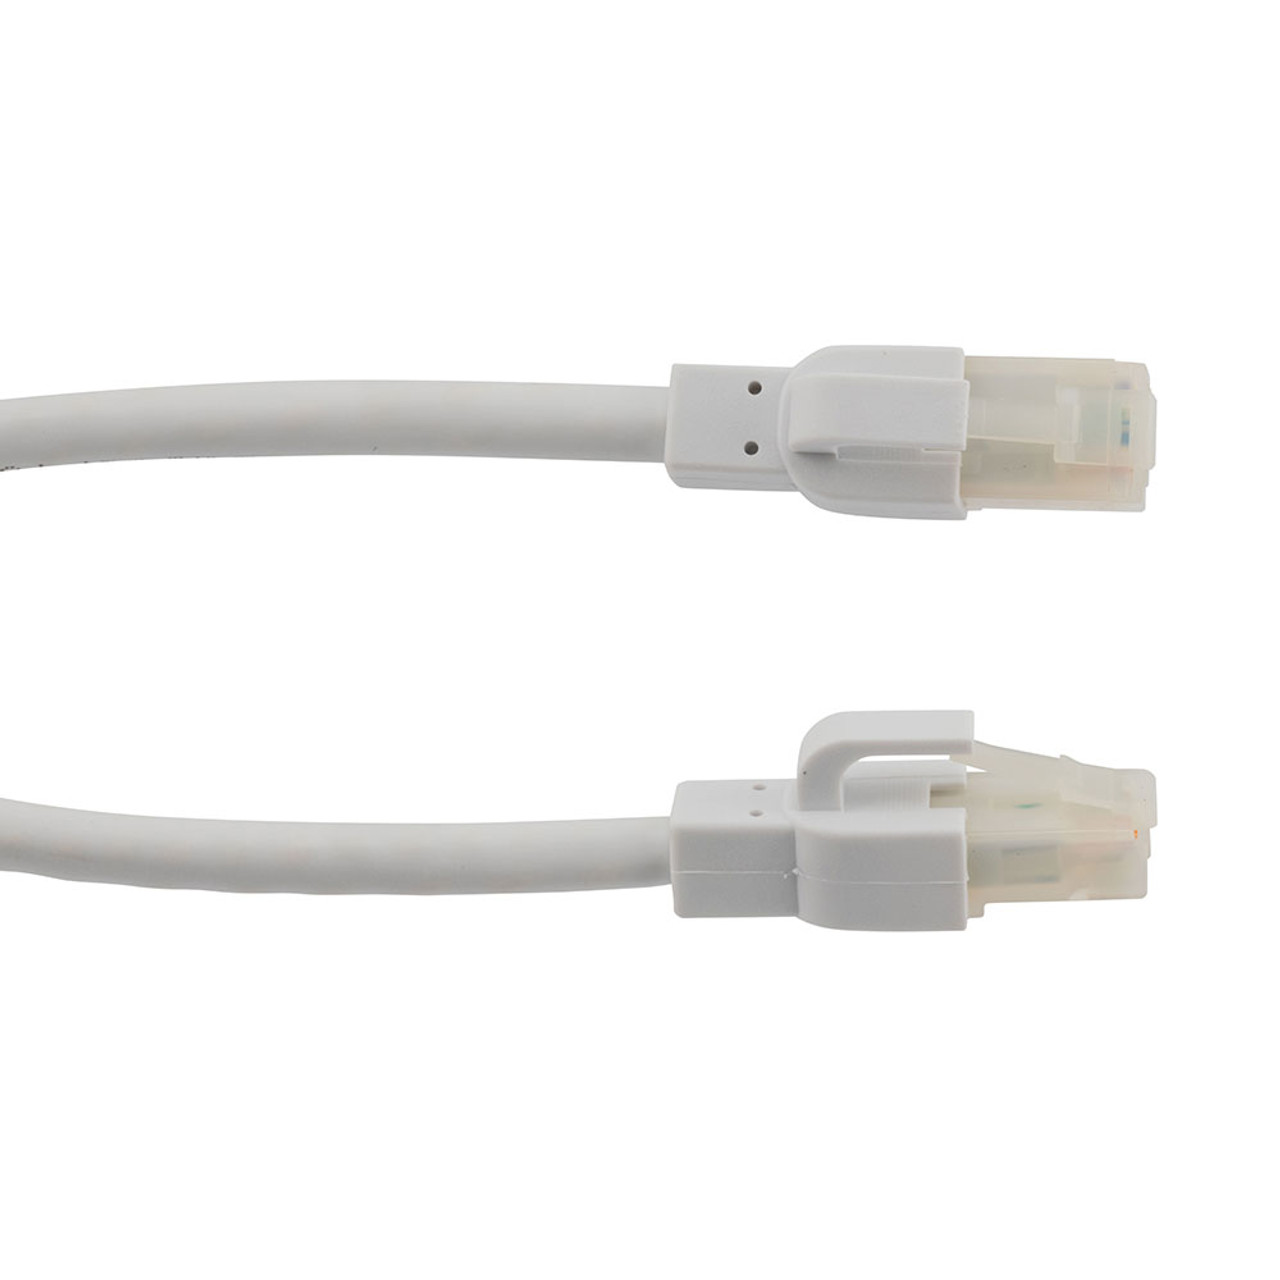 Category 6a 10 Gbps Ethernet Antibacterial Antimicrobial Cable Assembly, RJ45 Male/Plug, U/UTP, 24 AWG, PVC Antibacterial, White, 3 FT